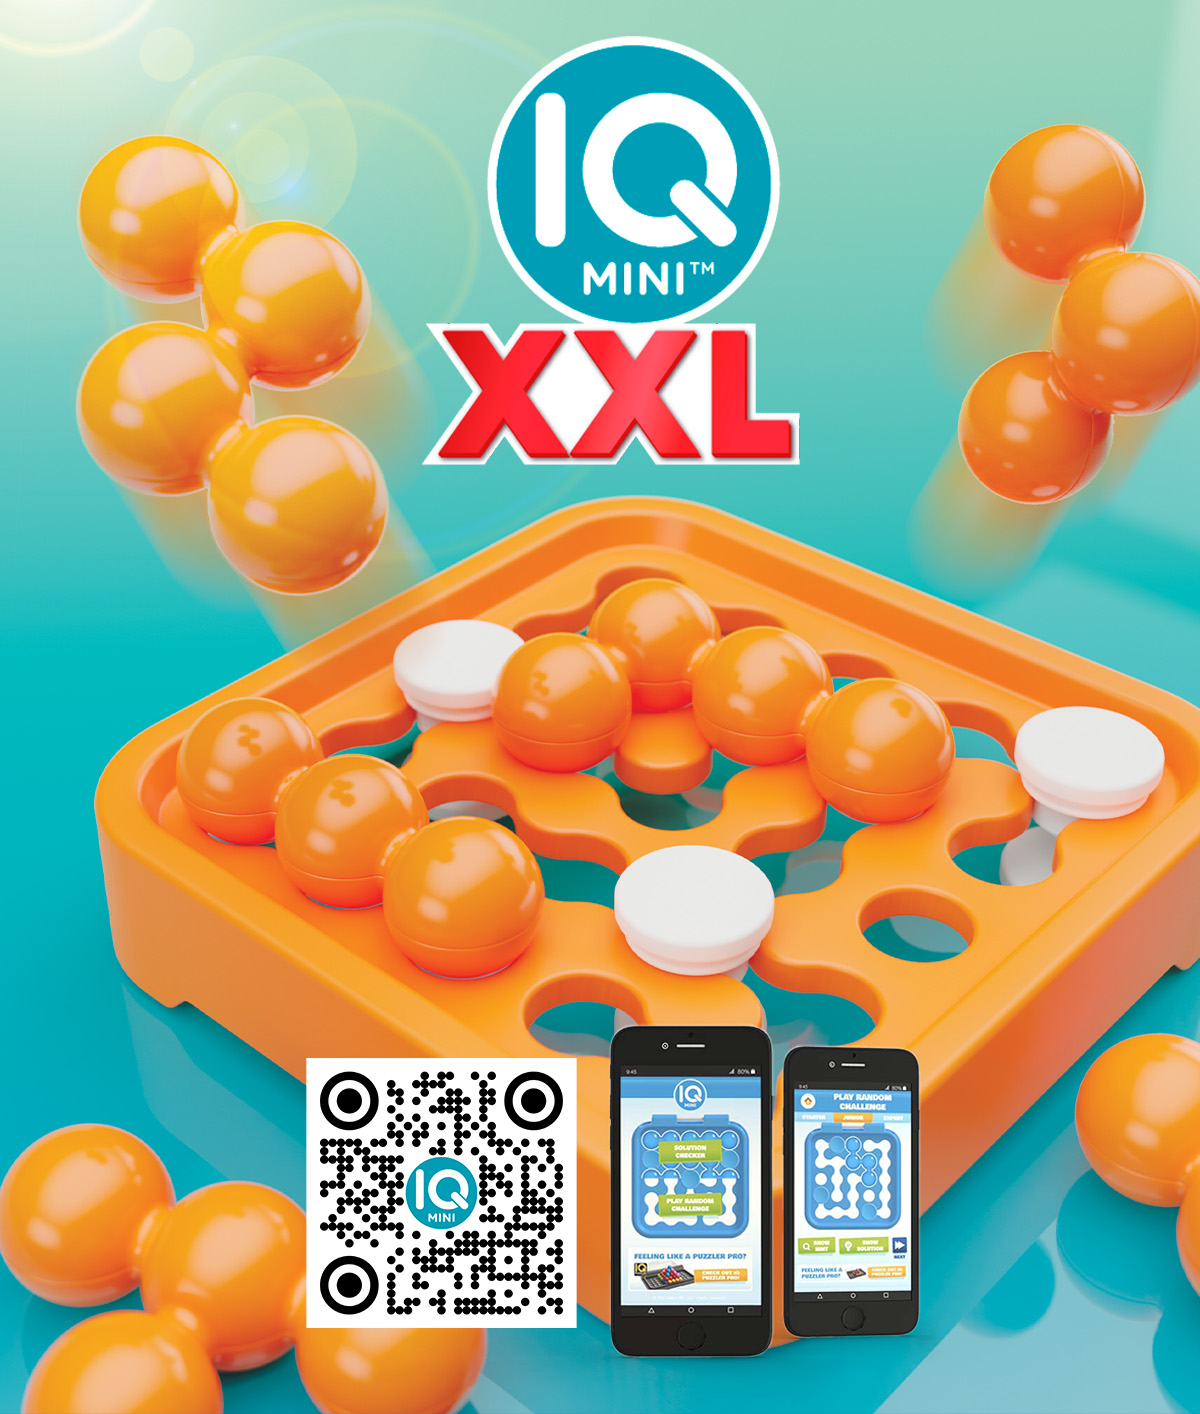 SmartGames IQ Perplex Travel Puzzle Game with 120 Challenges for Ages 12 -  Adult